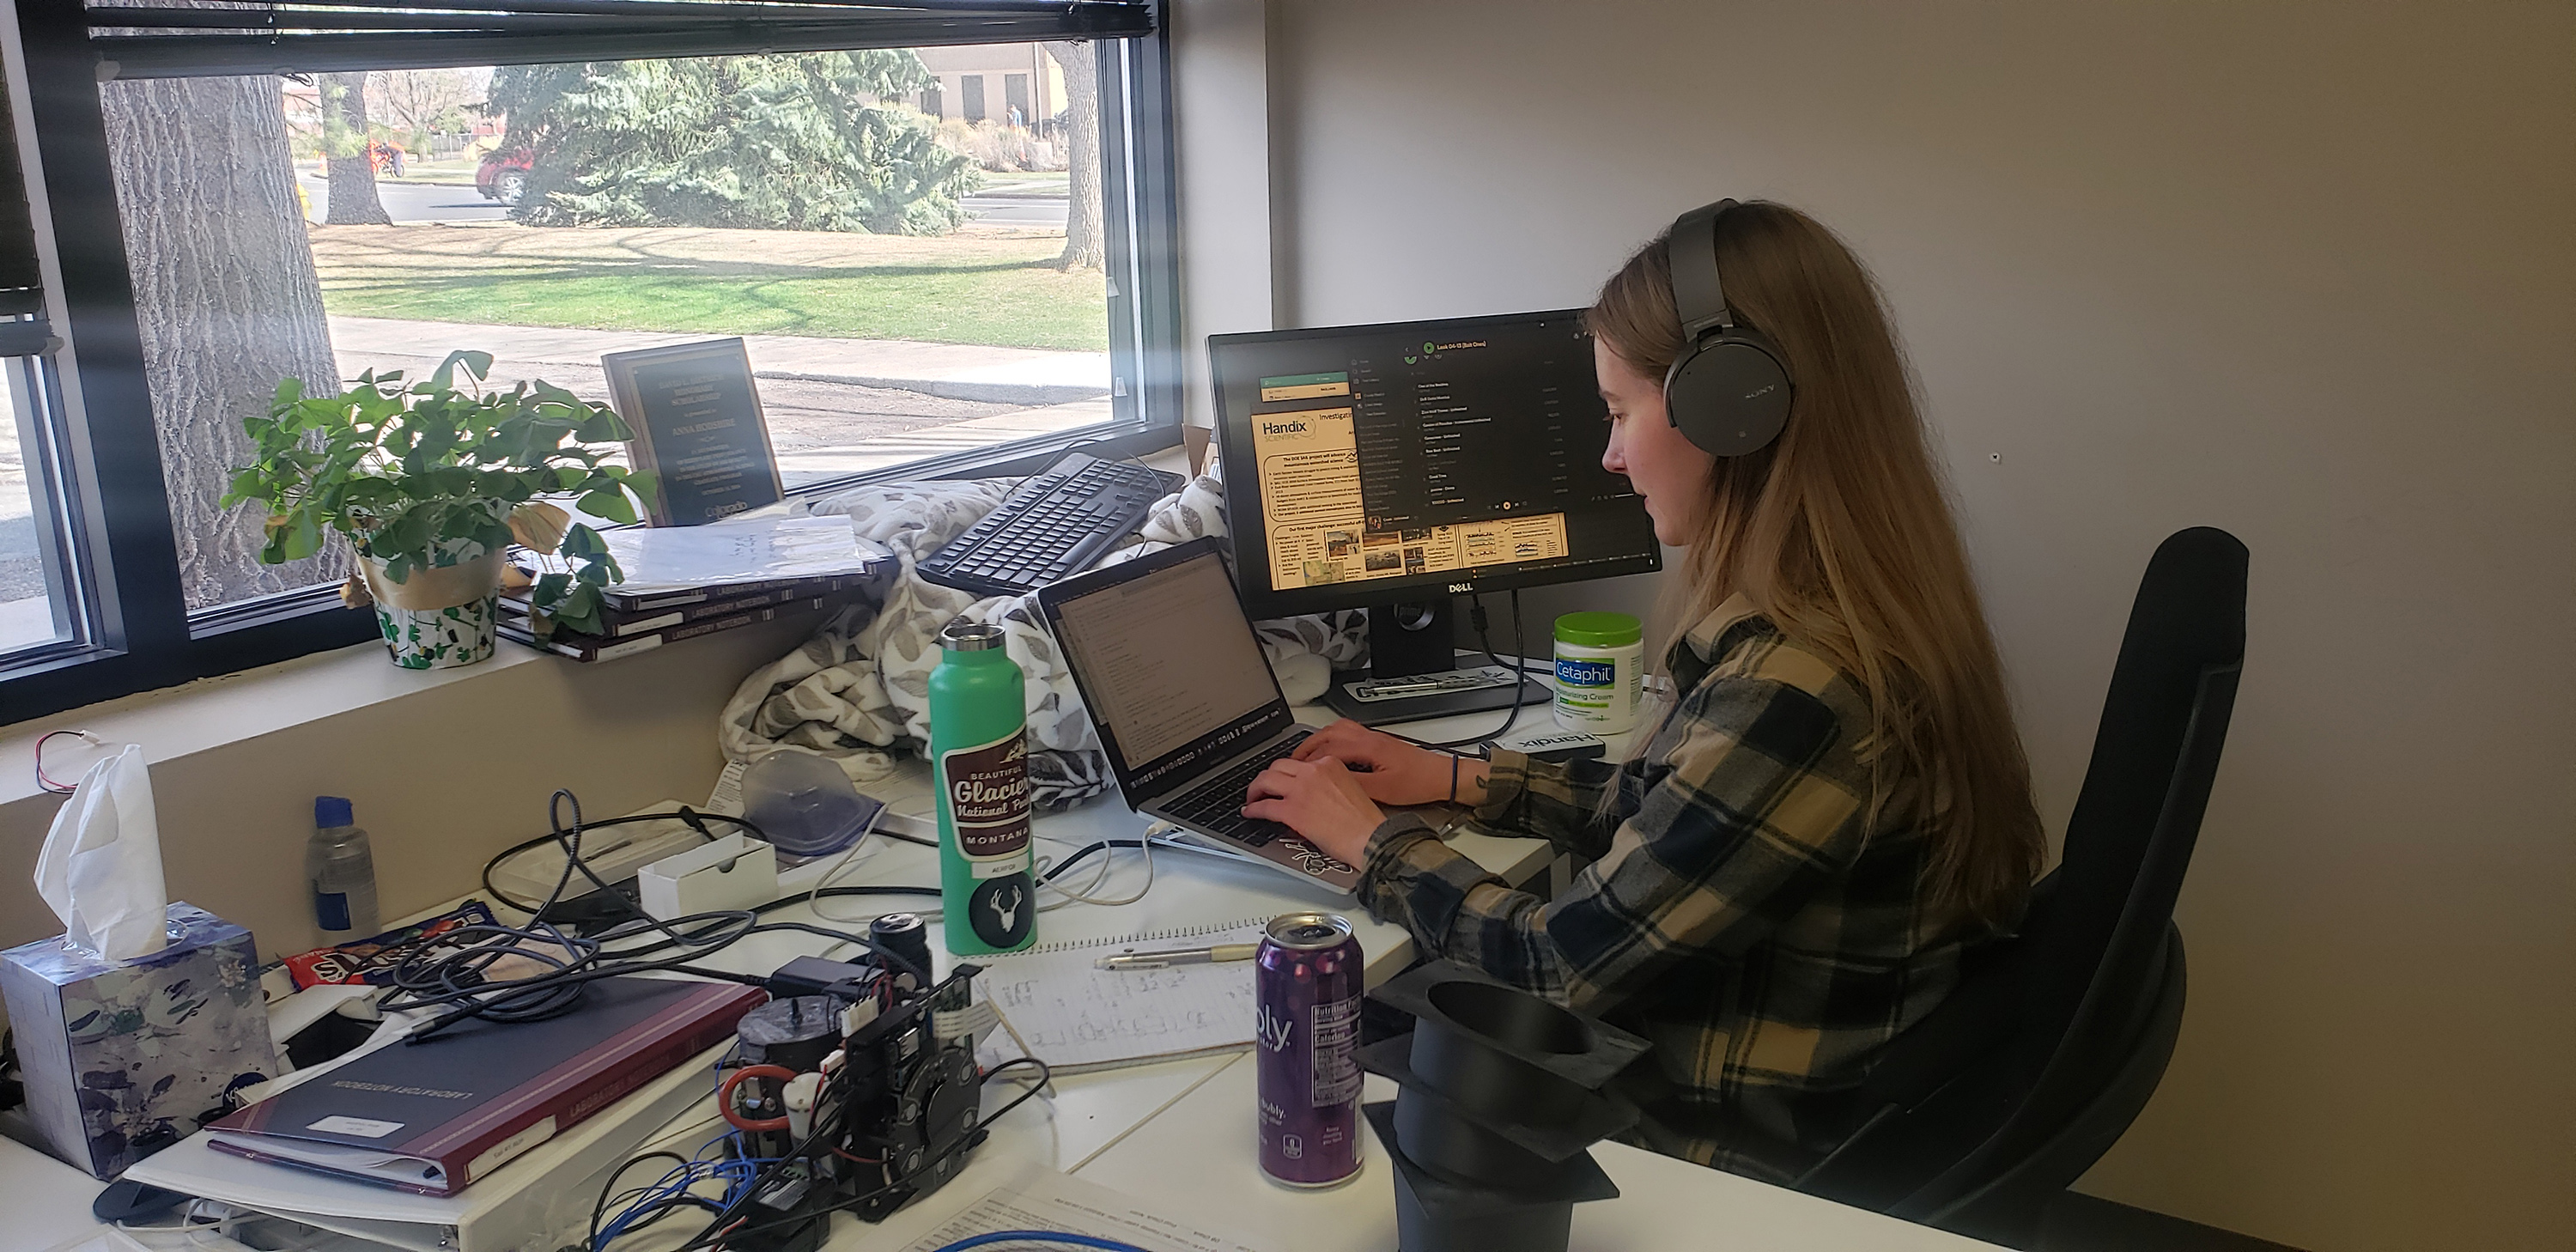 Modeler, mentor, data analyst, and observationalist Anna Hodshire in her office at Handix Scientific in Fort Collins, Colorado. “I work at my computer a lot,” she says. Photo is courtesy of Anna Hodshire.